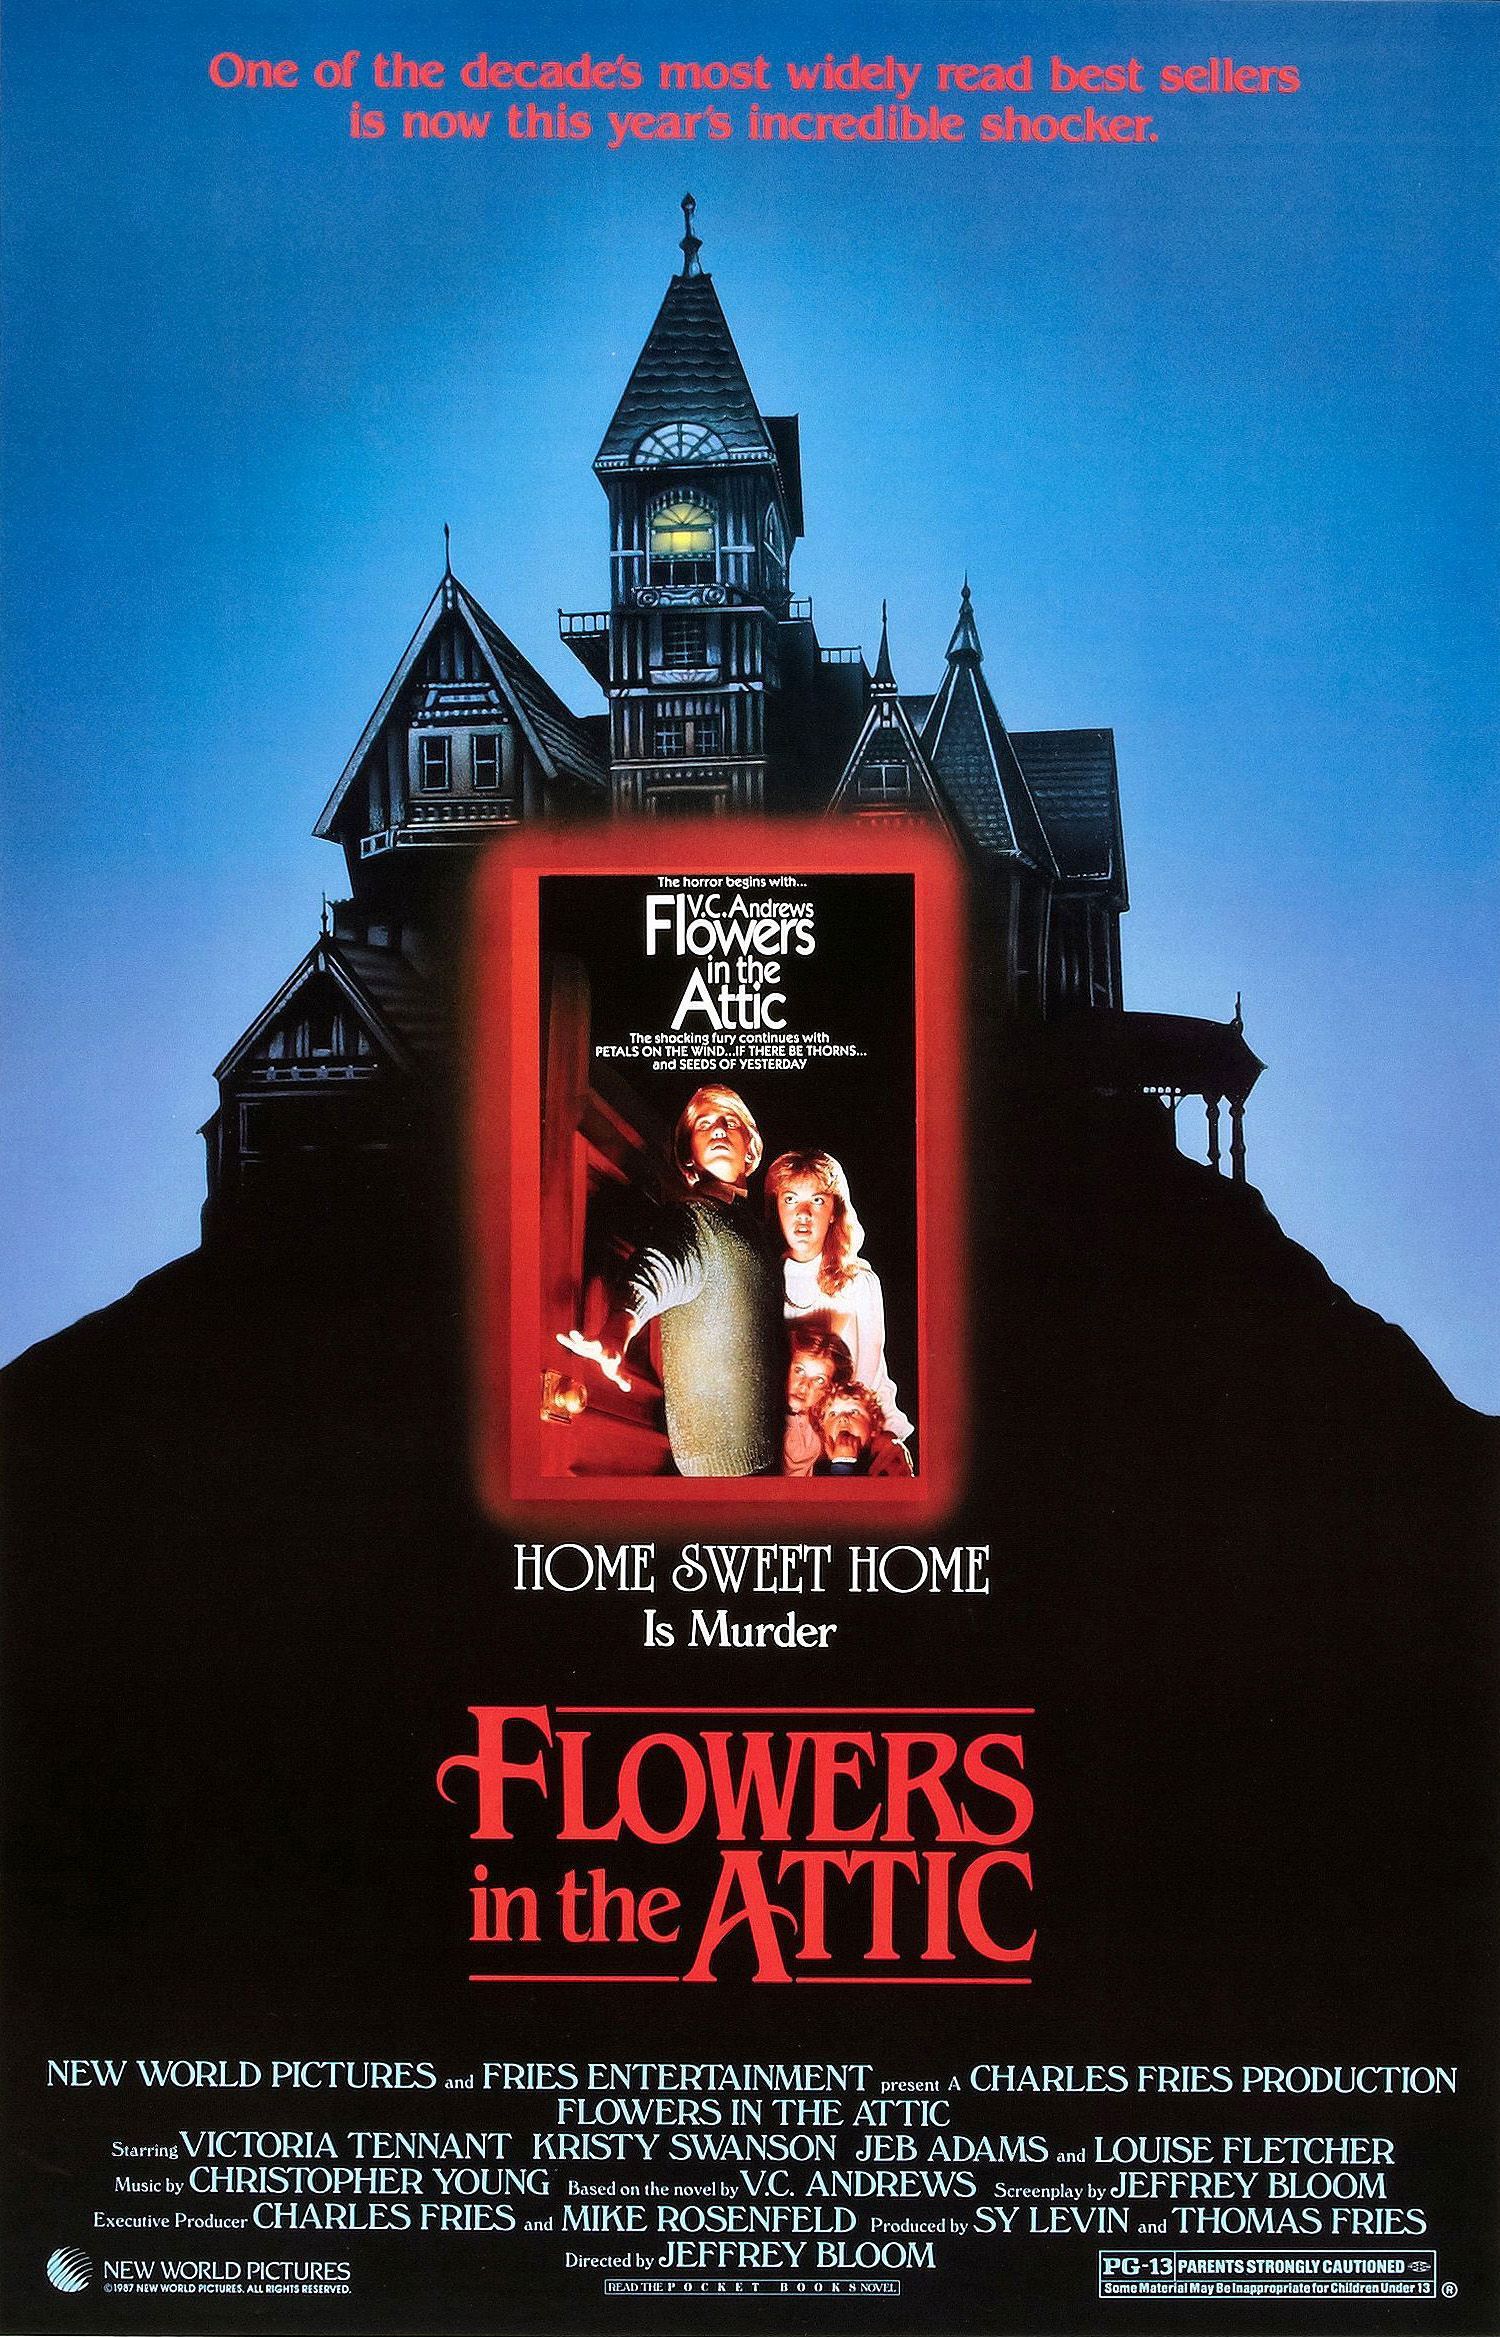 Flowers in the Attic 1987 Film Poster